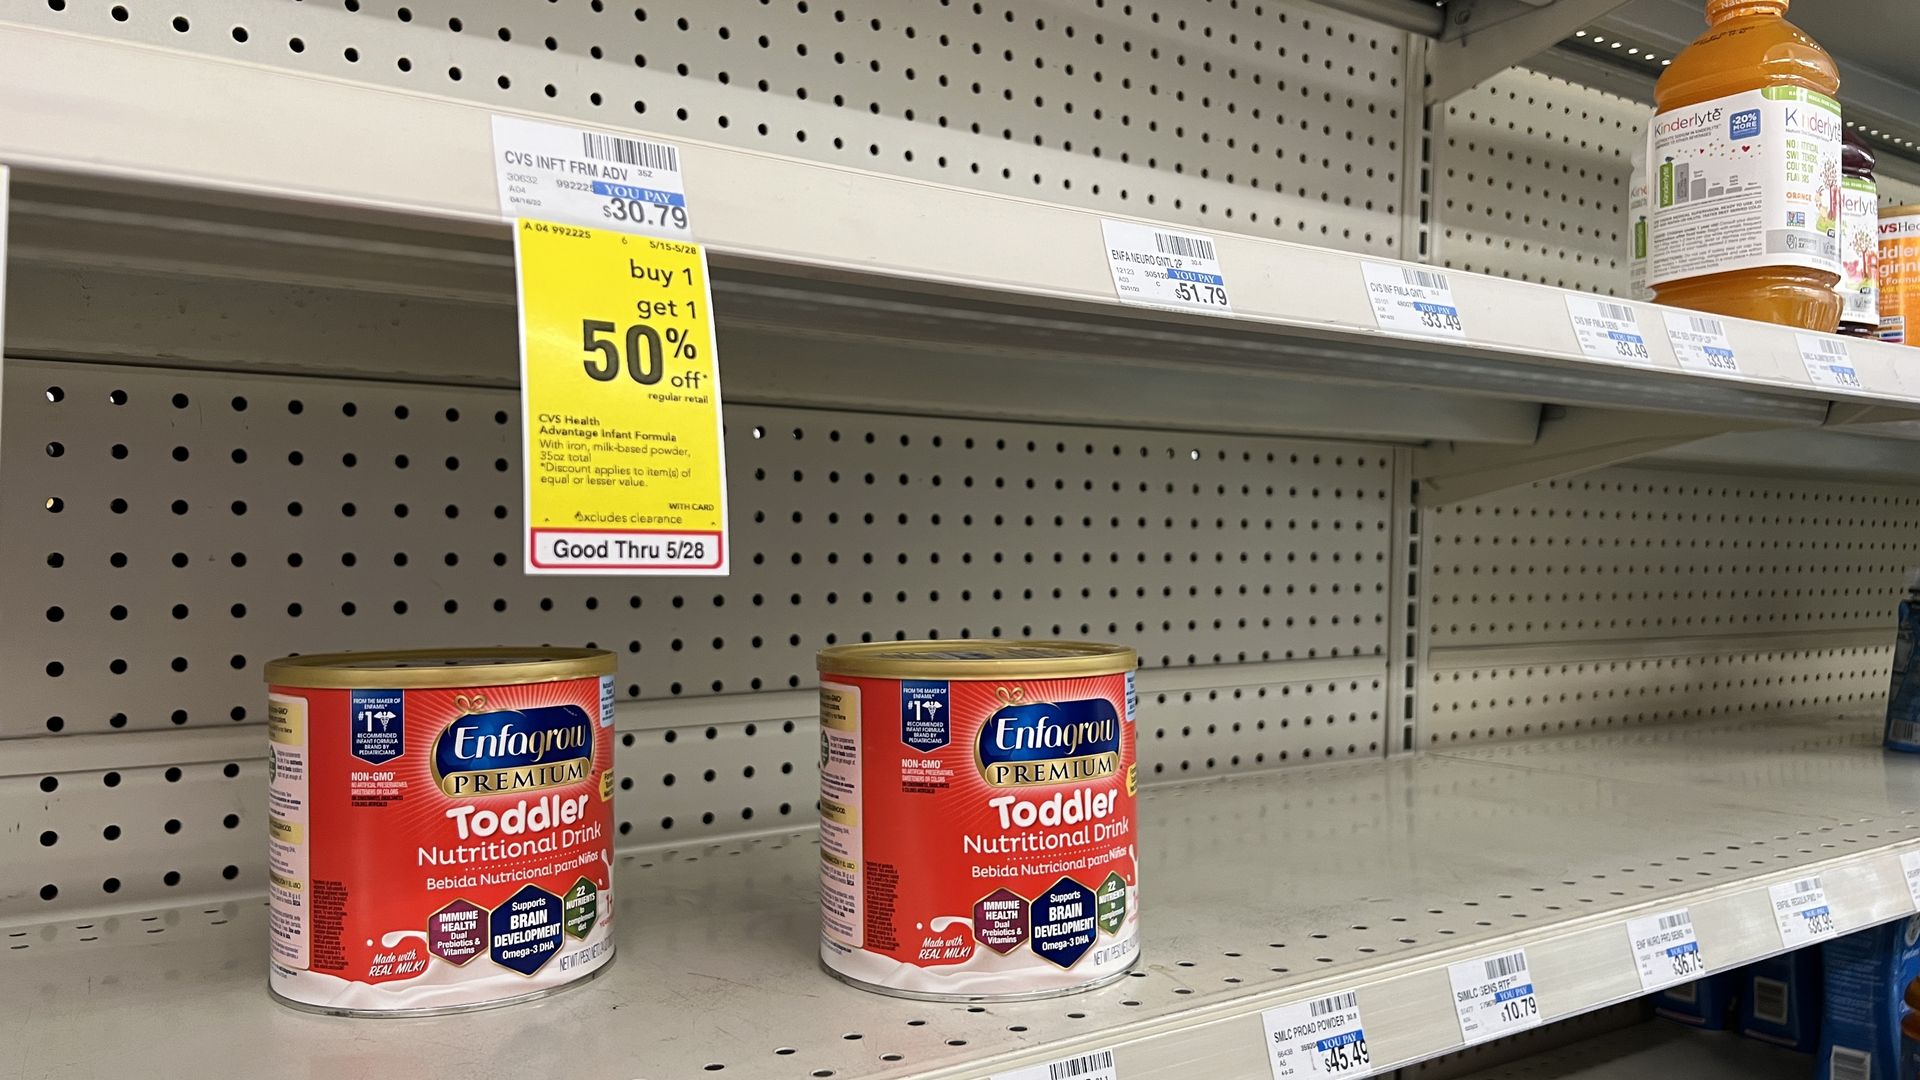 A few canisters of baby formula sit on mostly empty shelves at the store